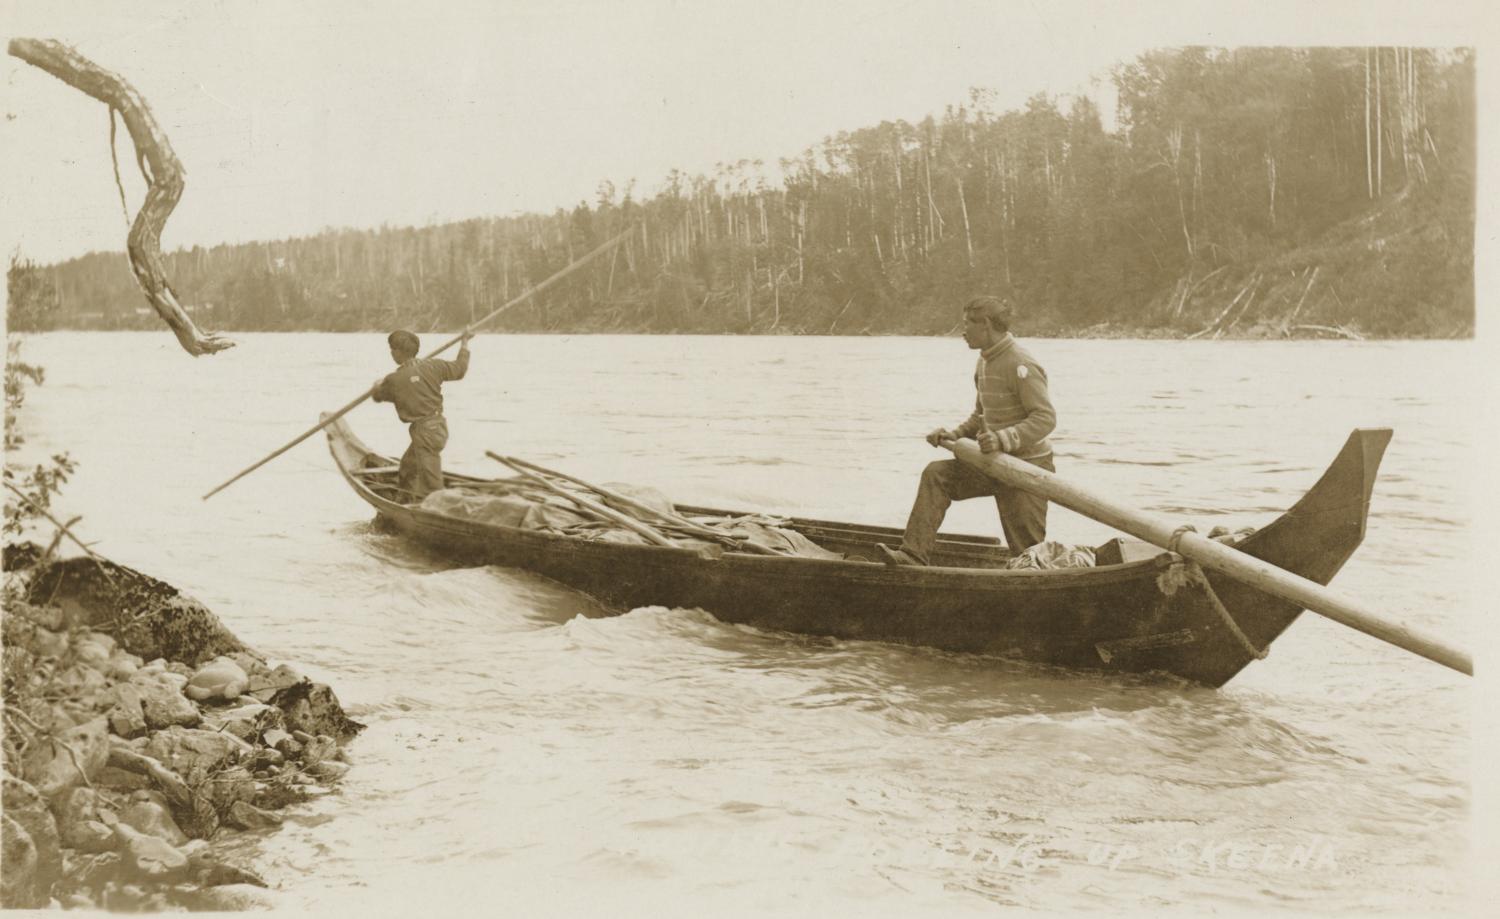 The item is a black and white photograph of the Skeena River taken around 1910 to 1911 by an unknown photographer. The view is from the bank and shows two Indigenous men standing in a canoe. The men are identified as Tsimshian.